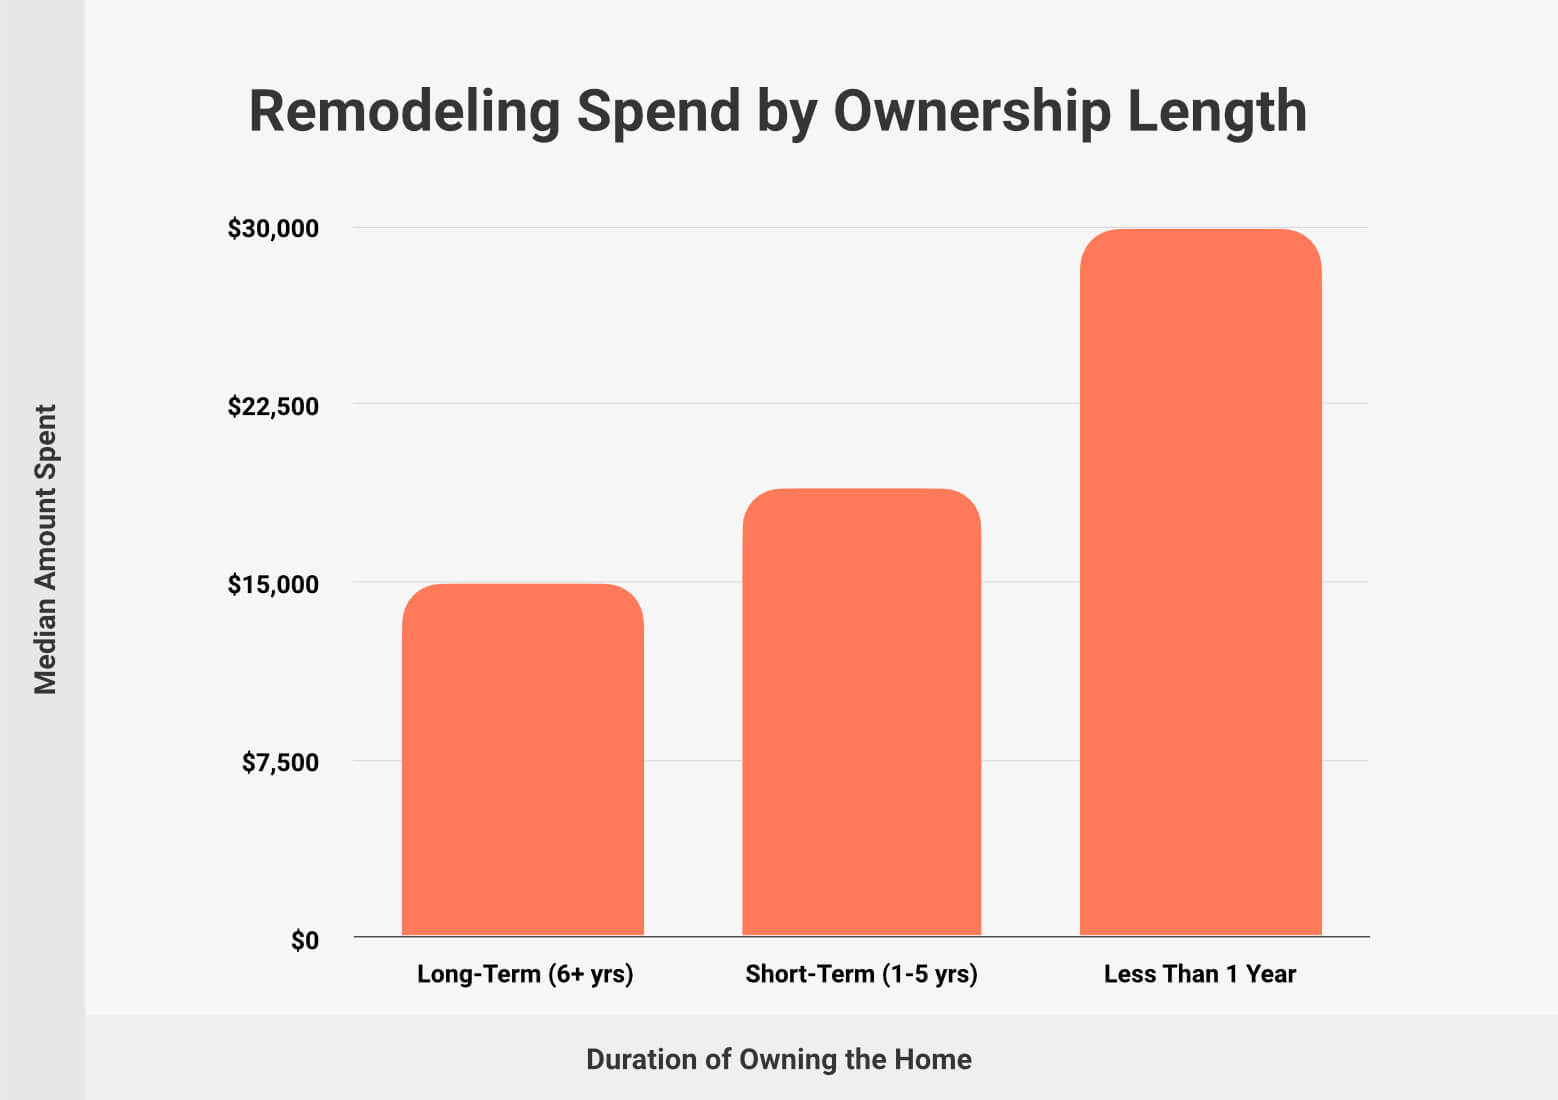 Remodeling Spend by Ownership Length